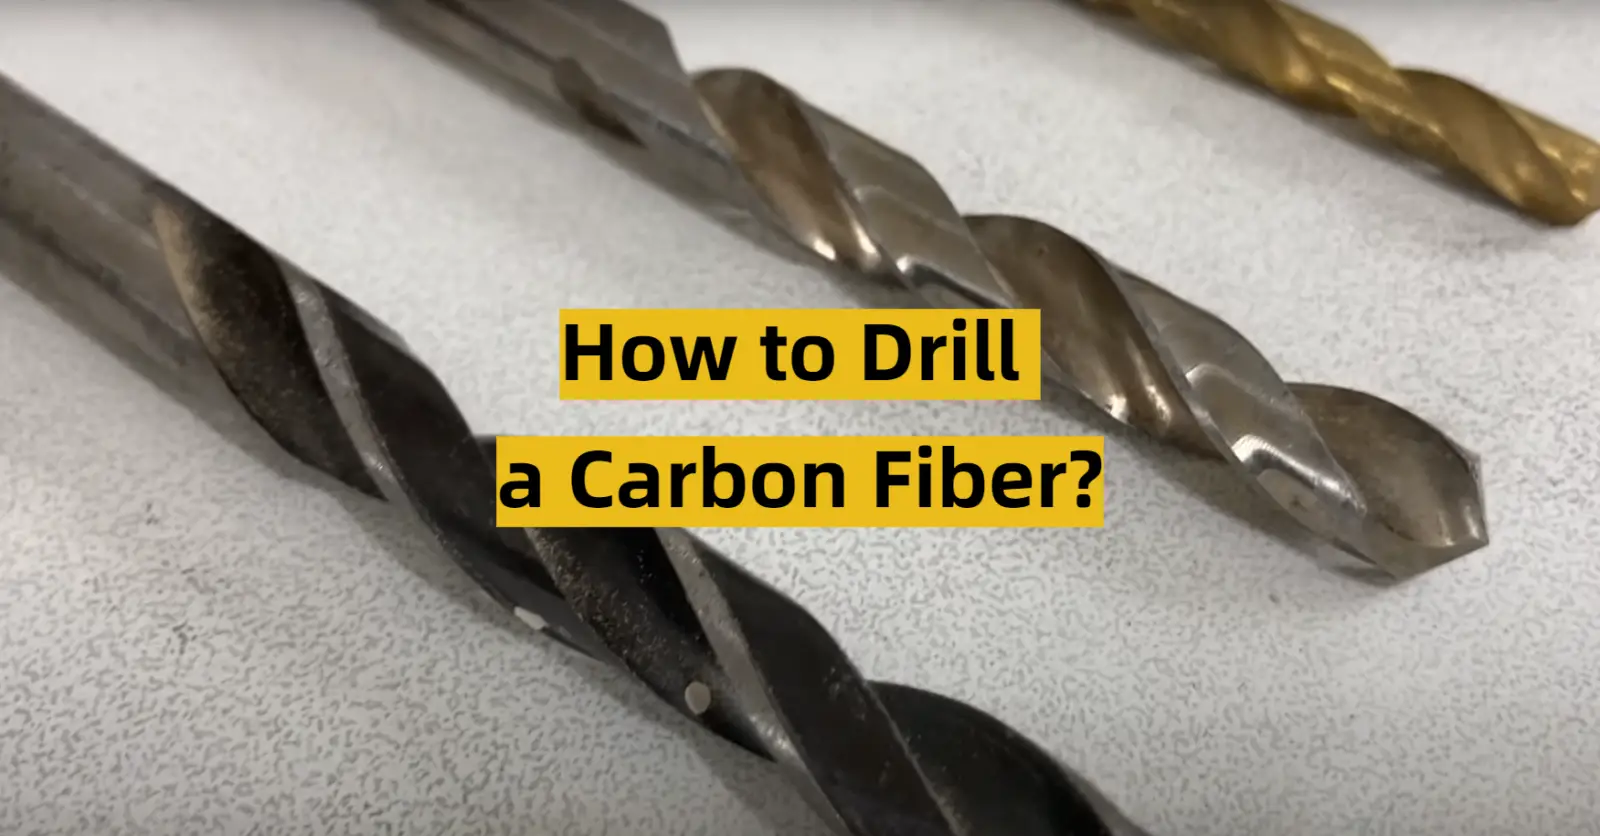 How to Drill a Carbon Fiber?